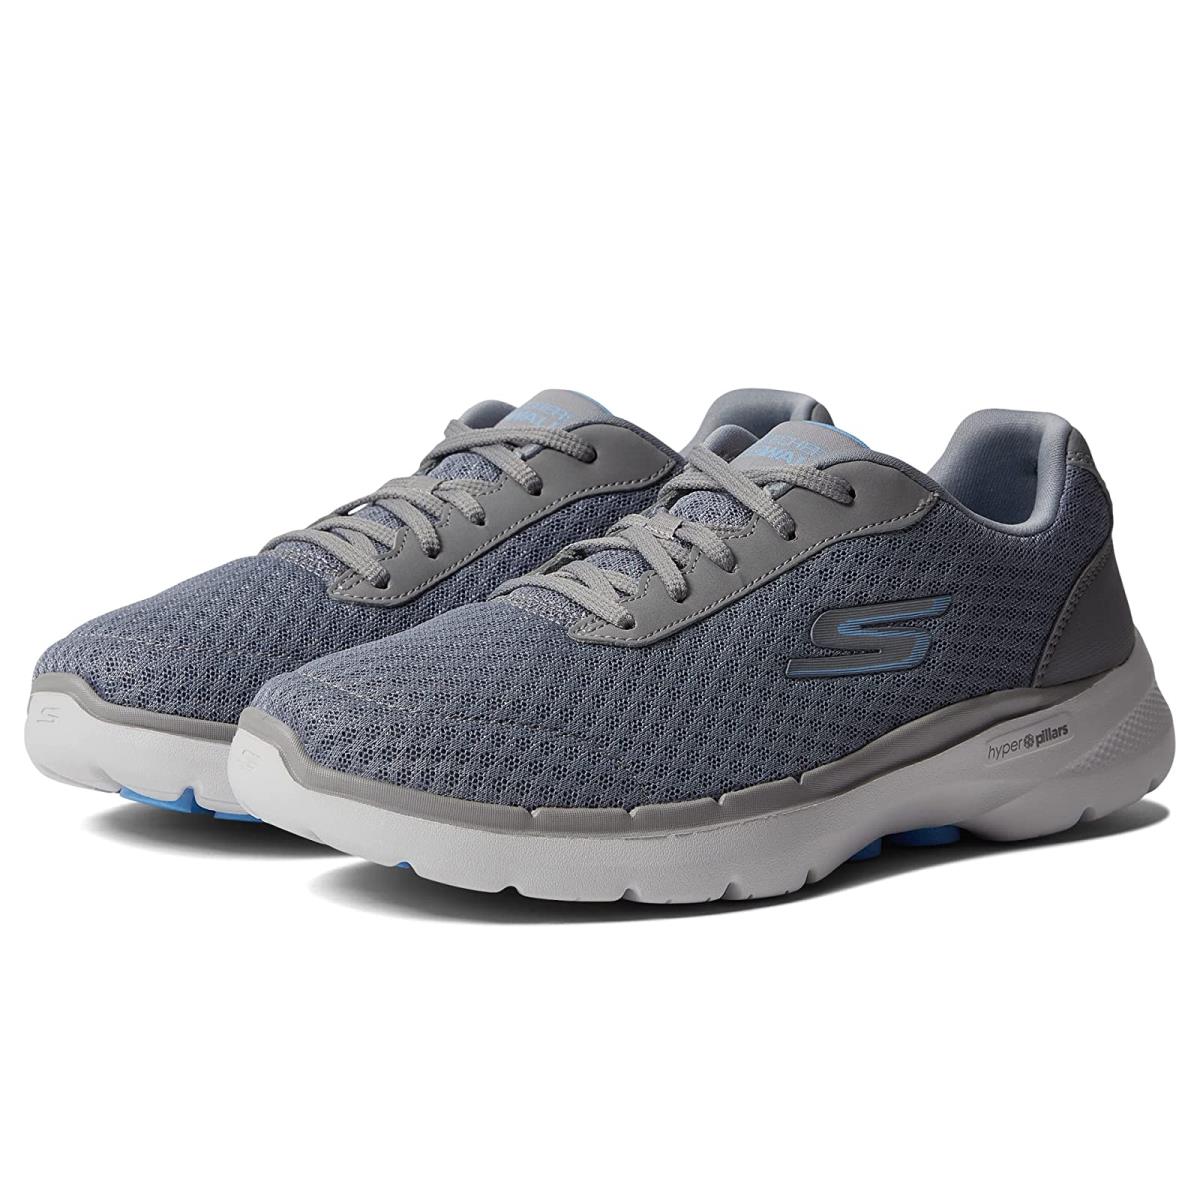 Woman`s Shoes Skechers Performance Go Walk 6 Iconic Vision Gray/Blue